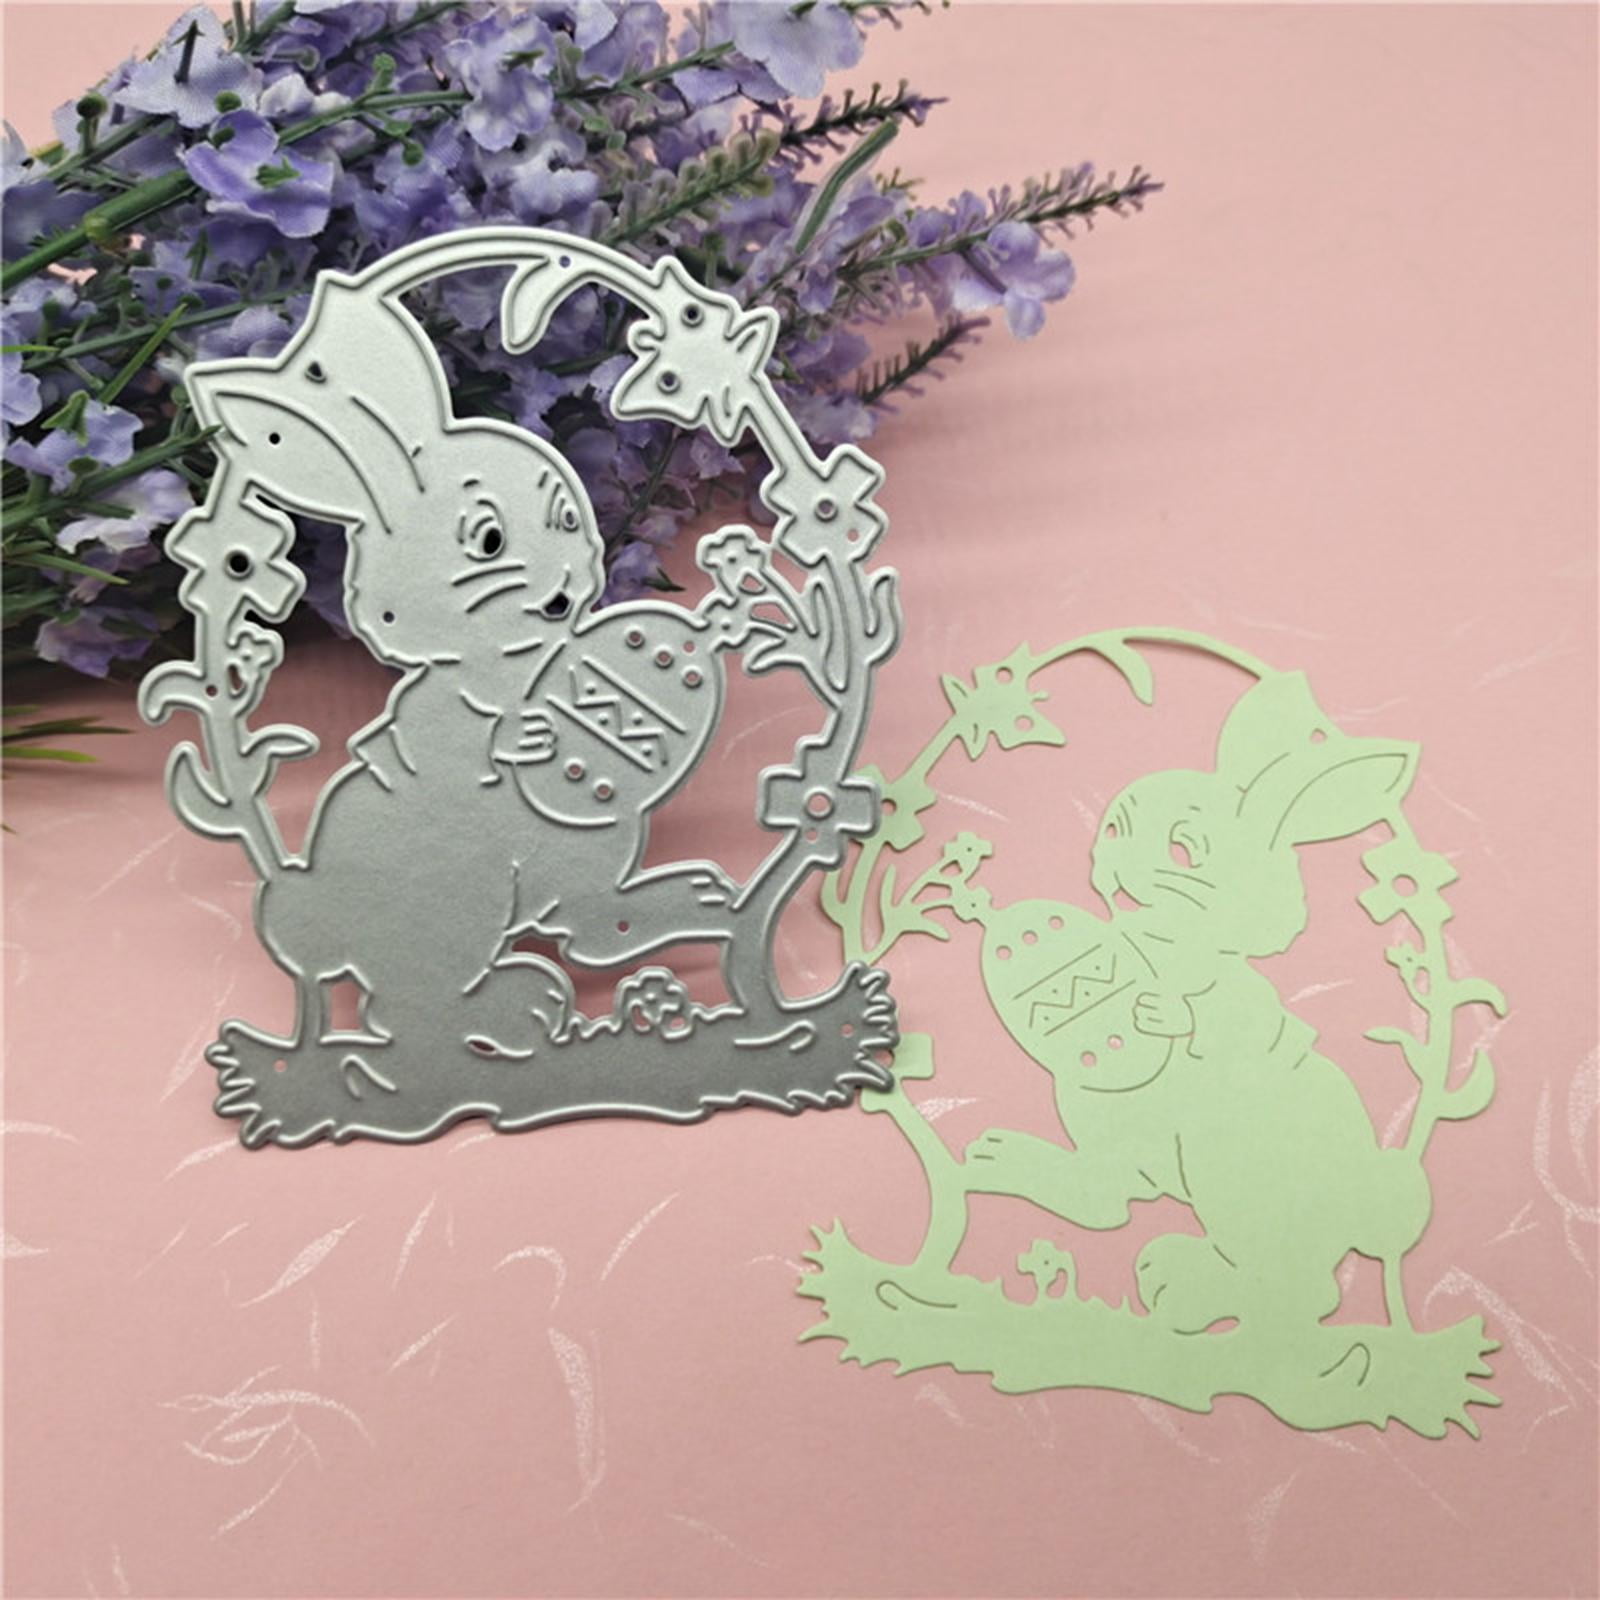 Rabbit Metal Cutting Dies Decoration,Sign Decorative Handmade Easter Egg  Bunny Die Cuts for Festival Birthday Holiday Scrapbook Card Making